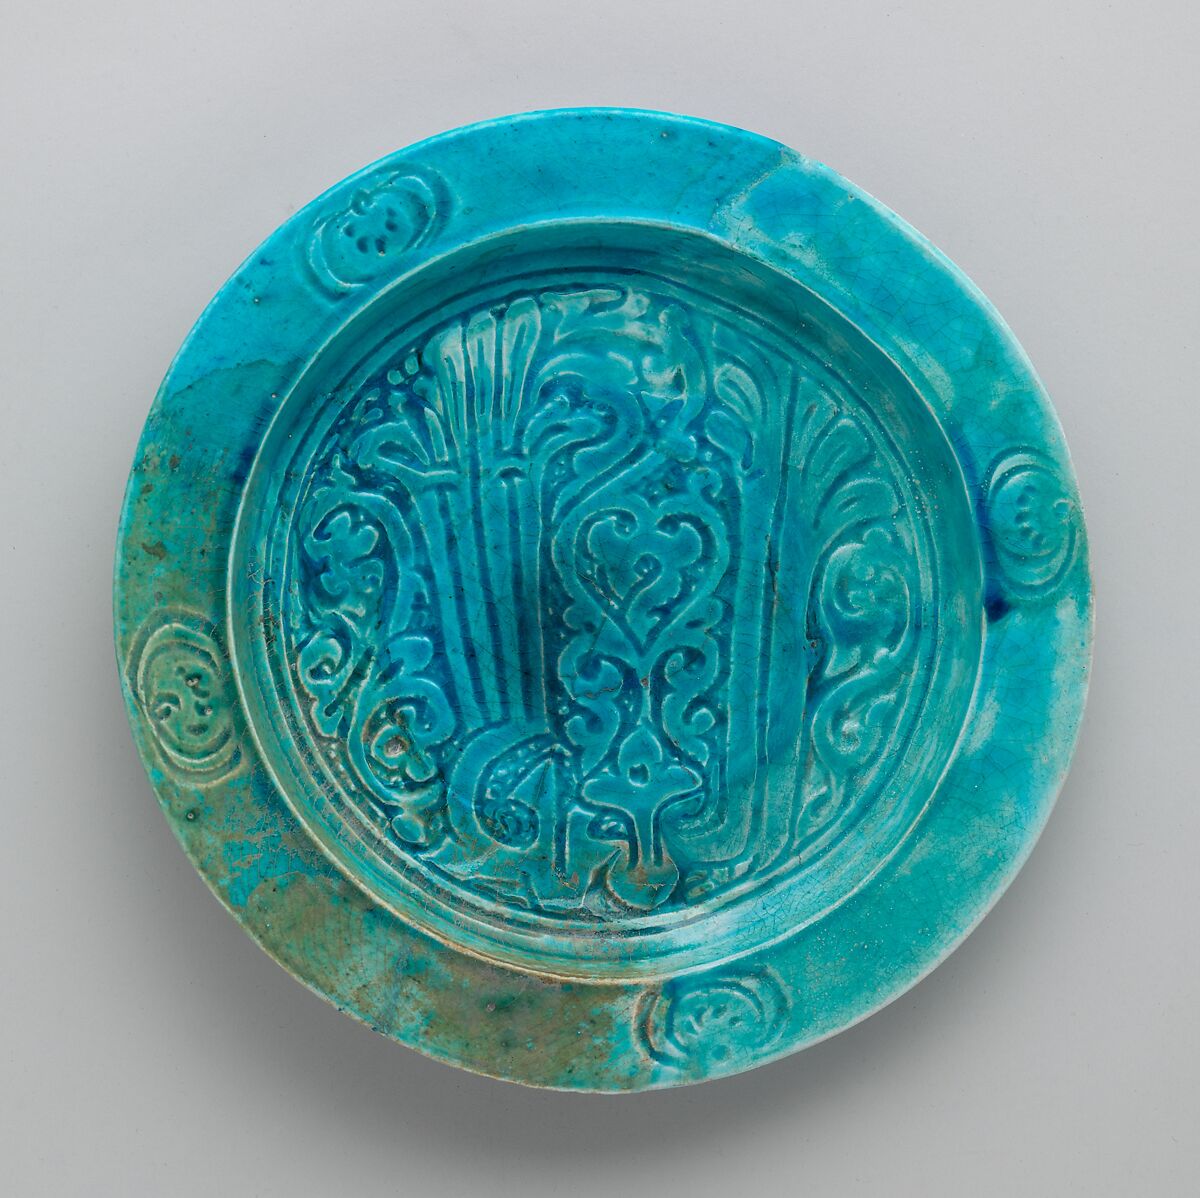 Dish with Carved Arabic Inscription in Floriated Kufic Reading 